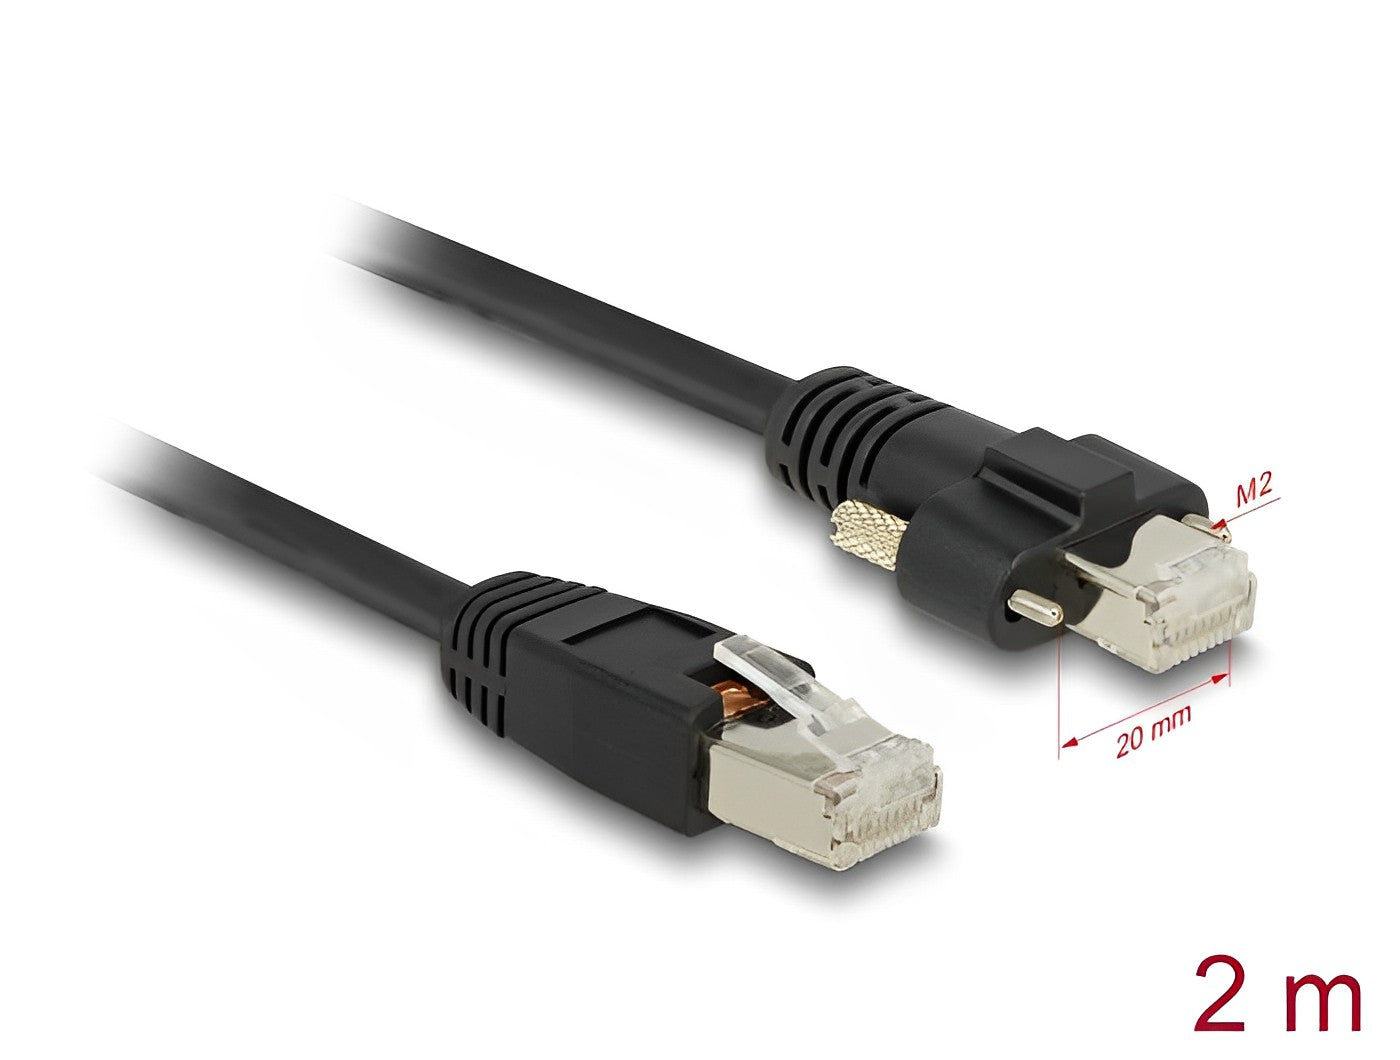 Delock Cable RJ45 plug to RJ45 plug with screw distance 20 mm for GigE Camera Cat.6A S/FTP 2 m black - delock.israel